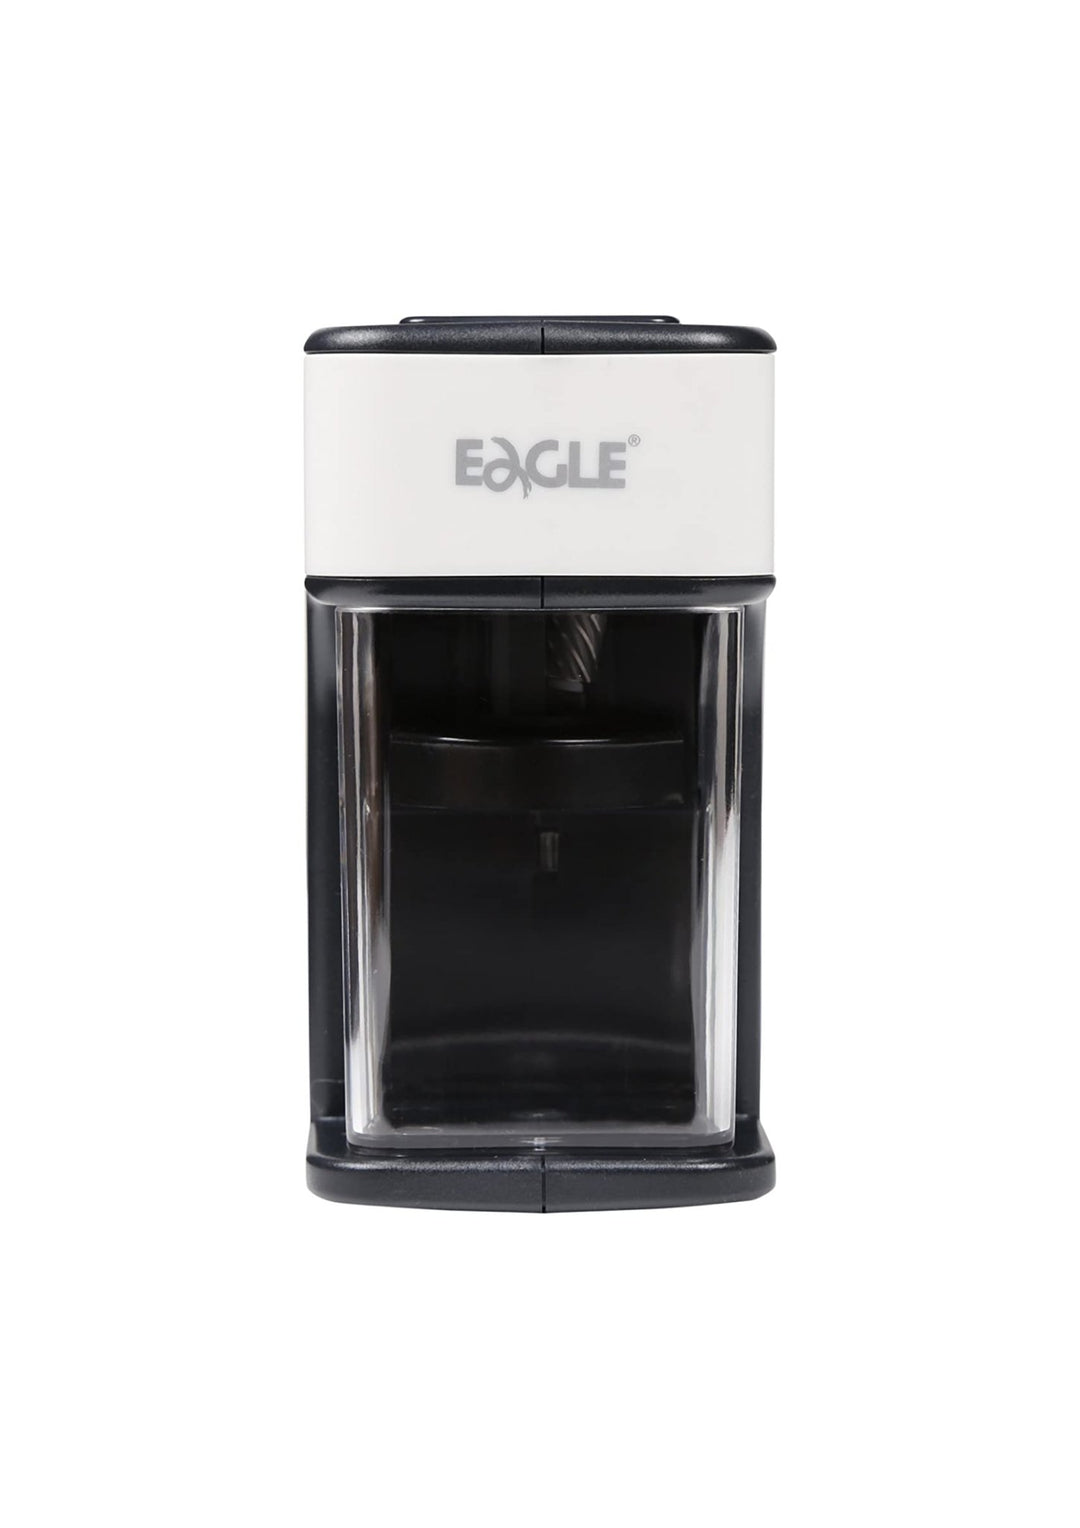 Eagle Automatic Electric Pencil Sharpener Helical Stainless Steel Cutter & Built In Pen Holder EG-5013 - SCOOBOO - EG-5013 - Electric sharpener